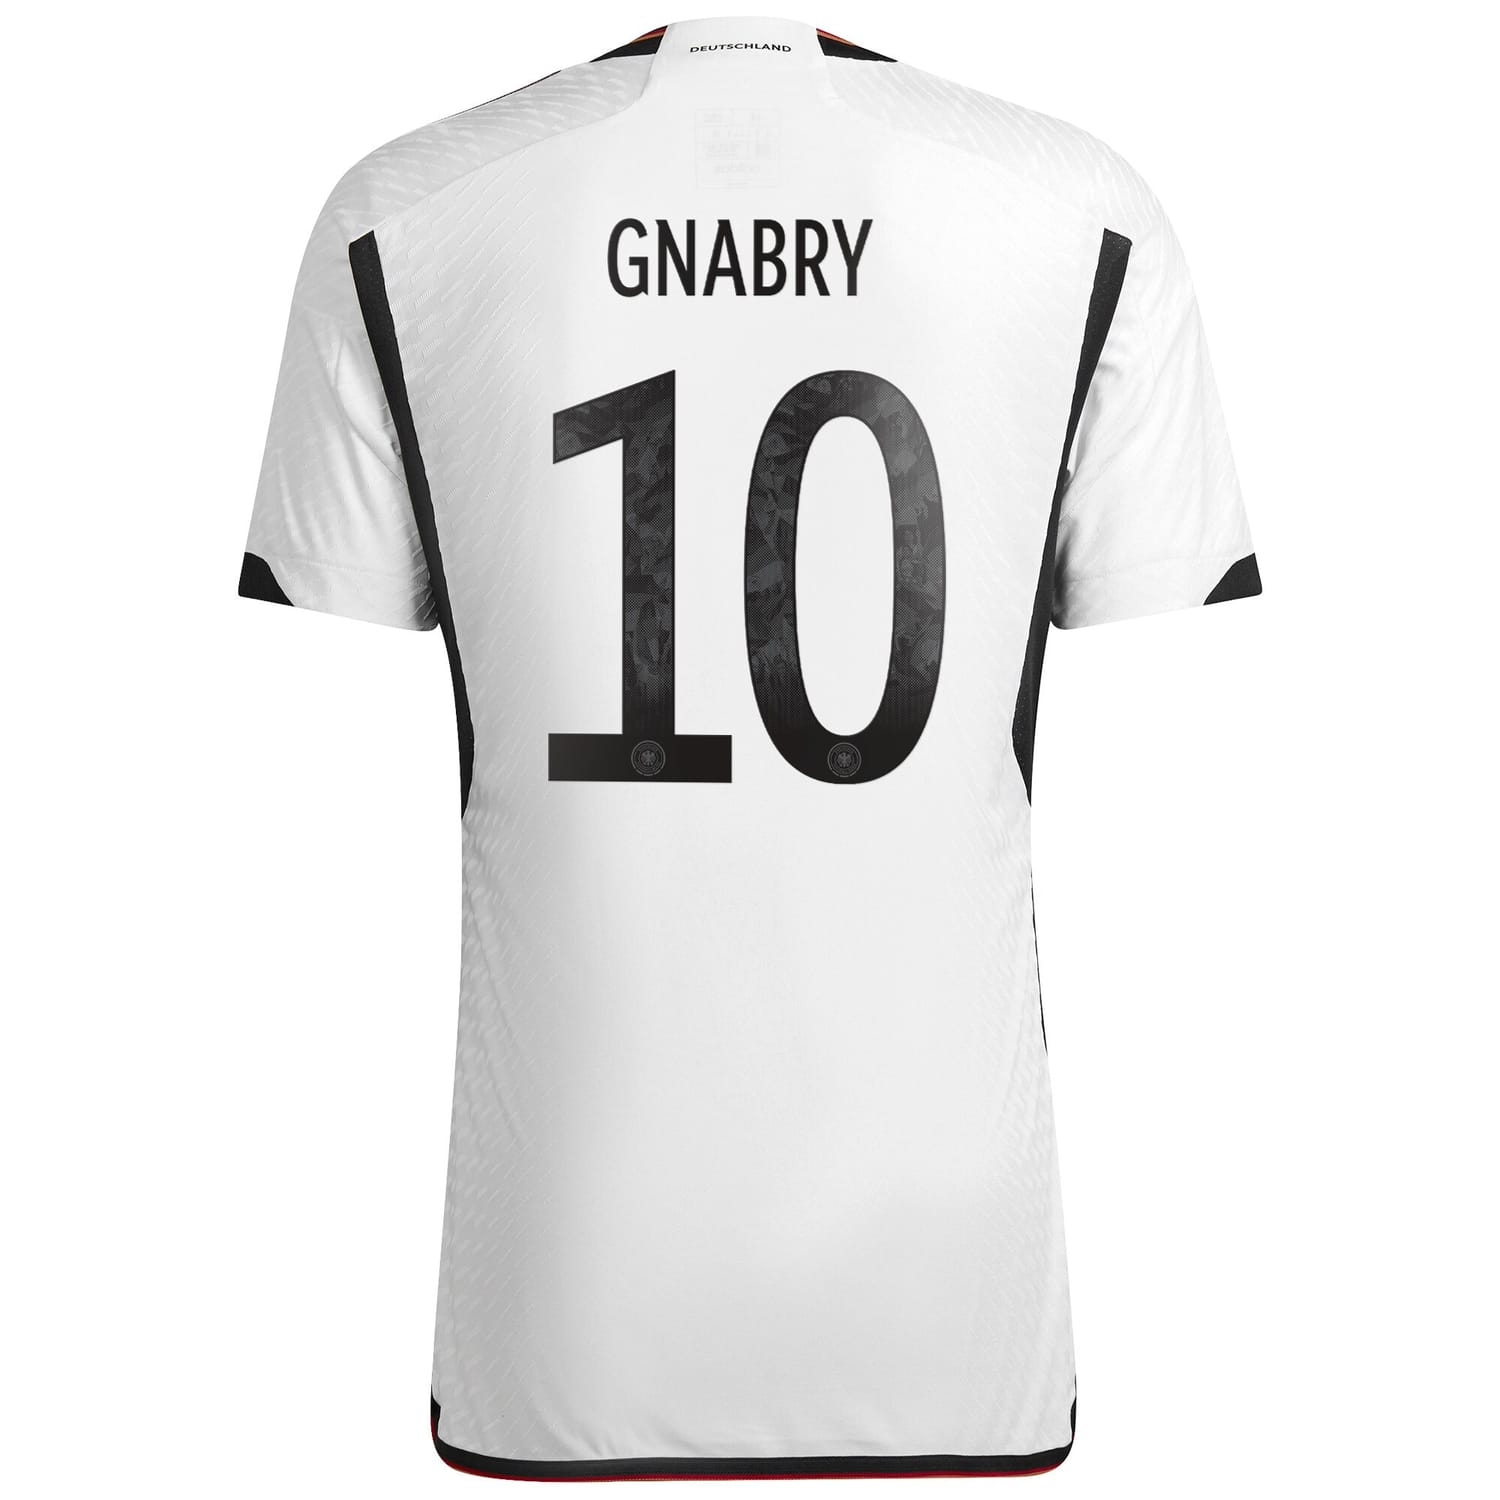 Germany National Team Home Authentic Jersey Shirt White 2022-23 player Serge Gnabry printing for Men